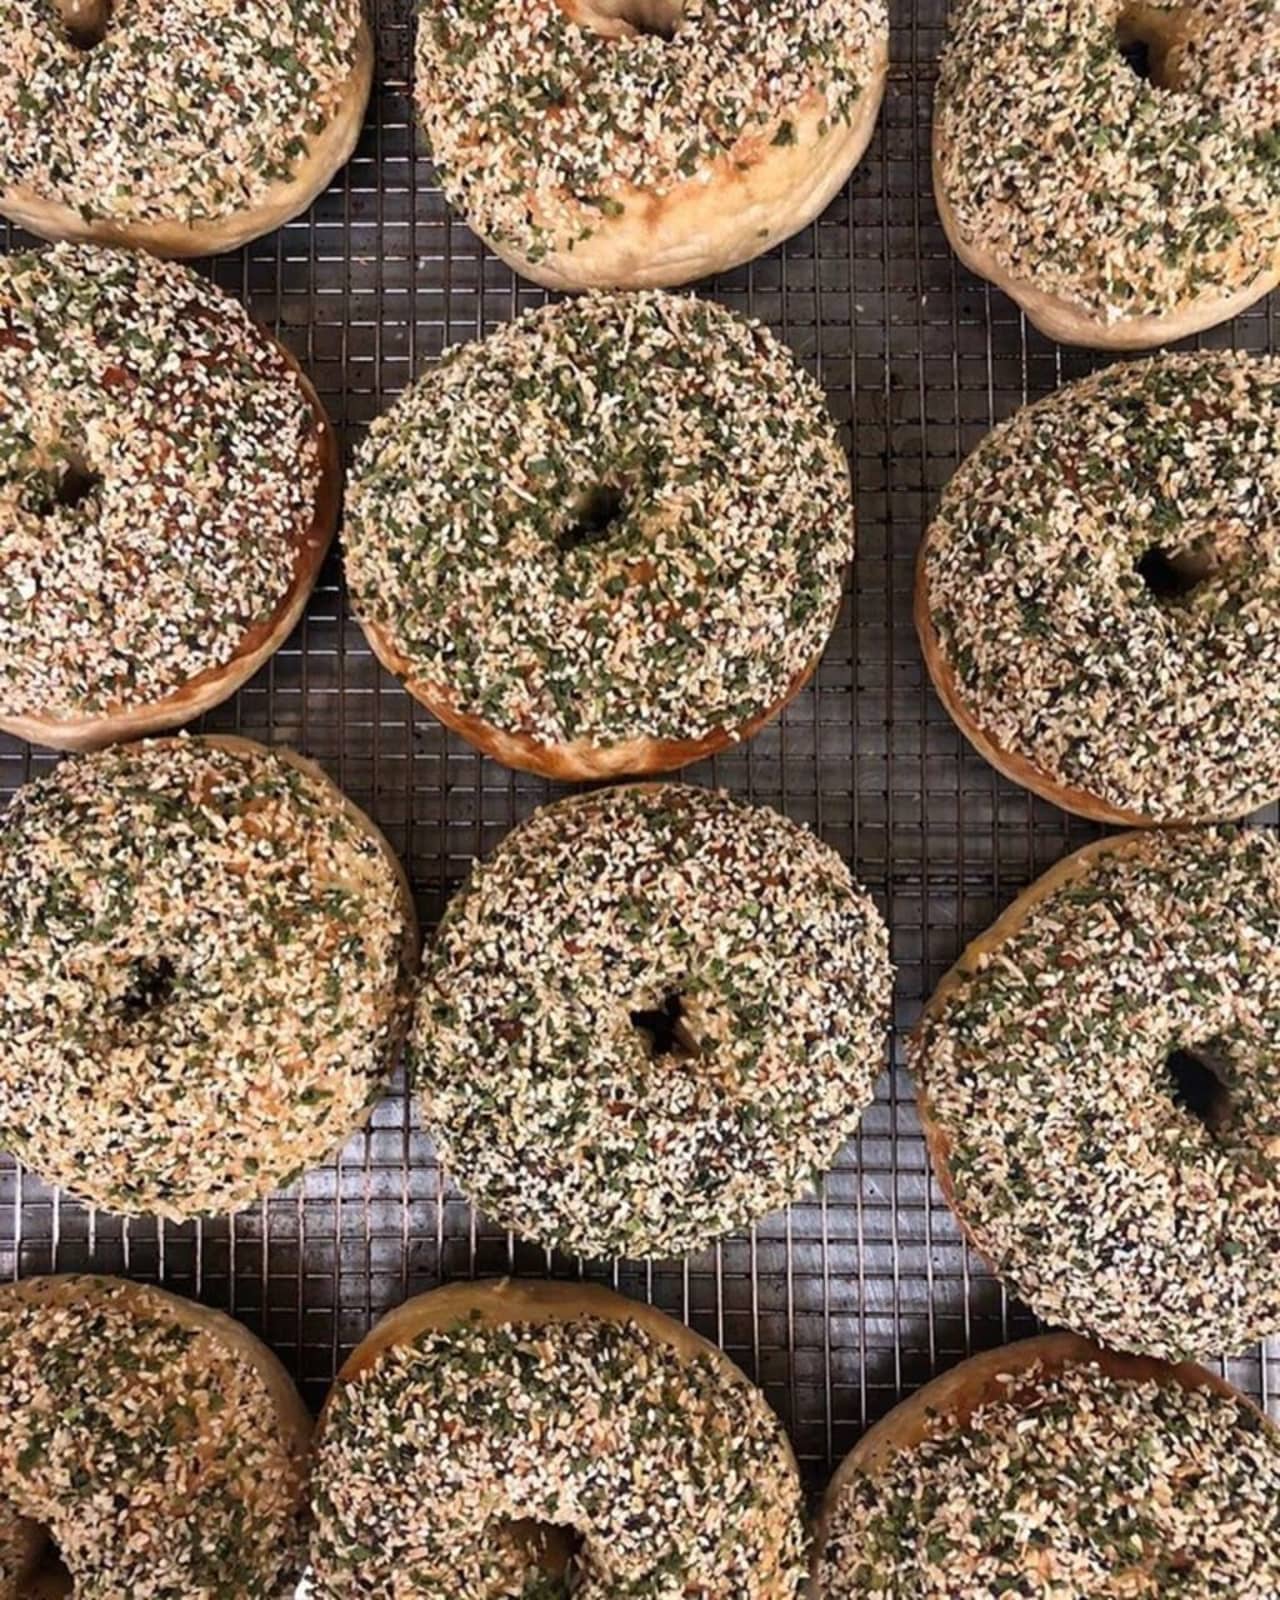 D’OH Bagels, located at 77 E. Milton Ave. in Rahway, makes every item fresh in-house each morning.